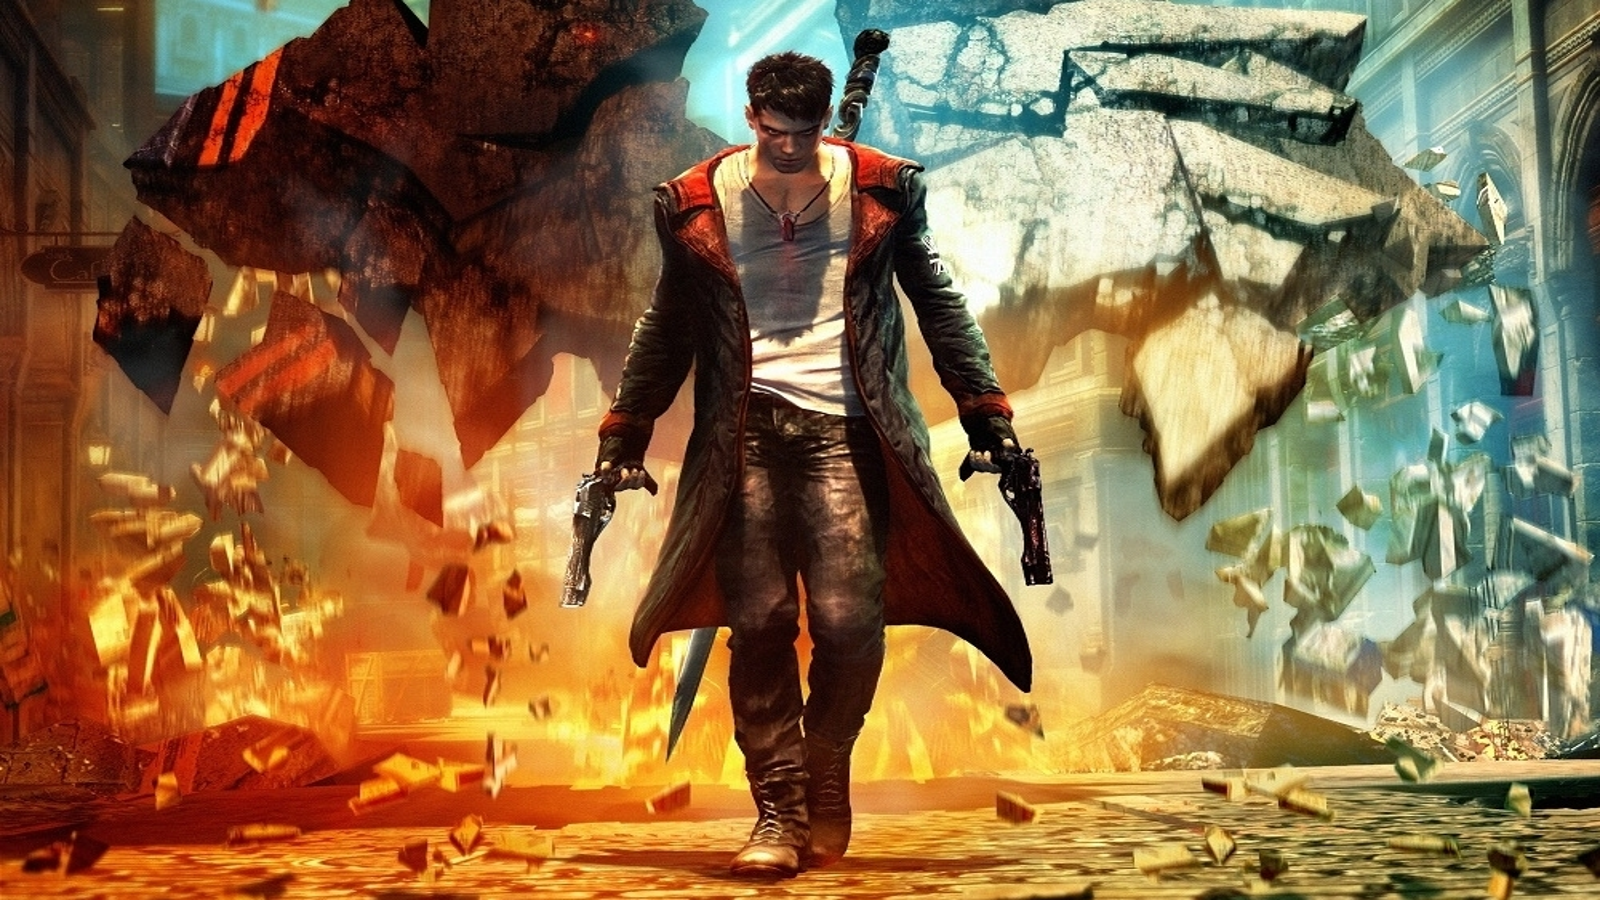 Devil May Cry - Review Of The 5-th Part Of The DMC Video Game